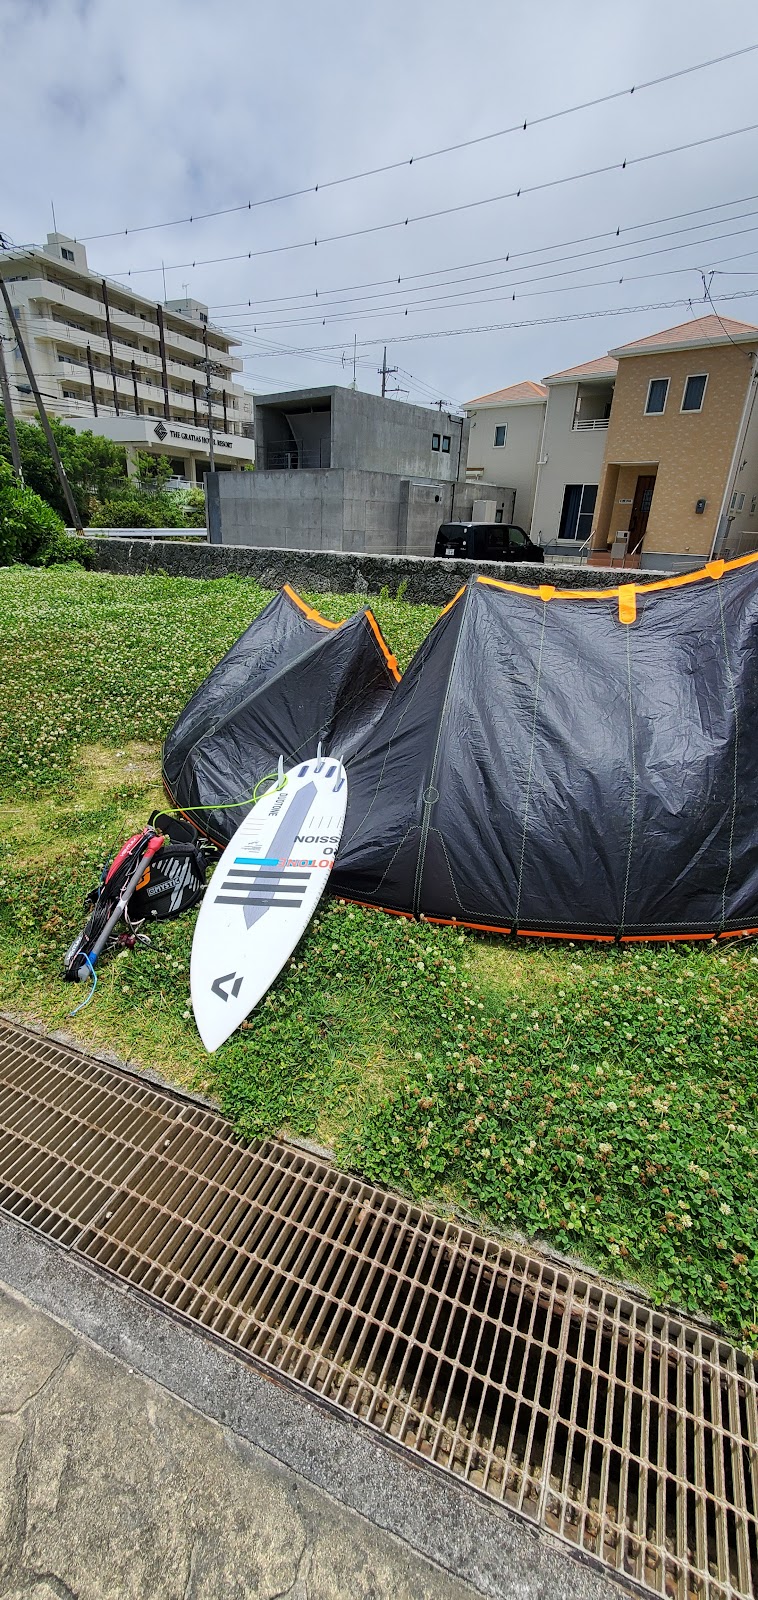 Guest house Tropical Surf House Okinawa ( surfing-kiteboarding school & rent ) kite-surfing shop marine snorkeling tour